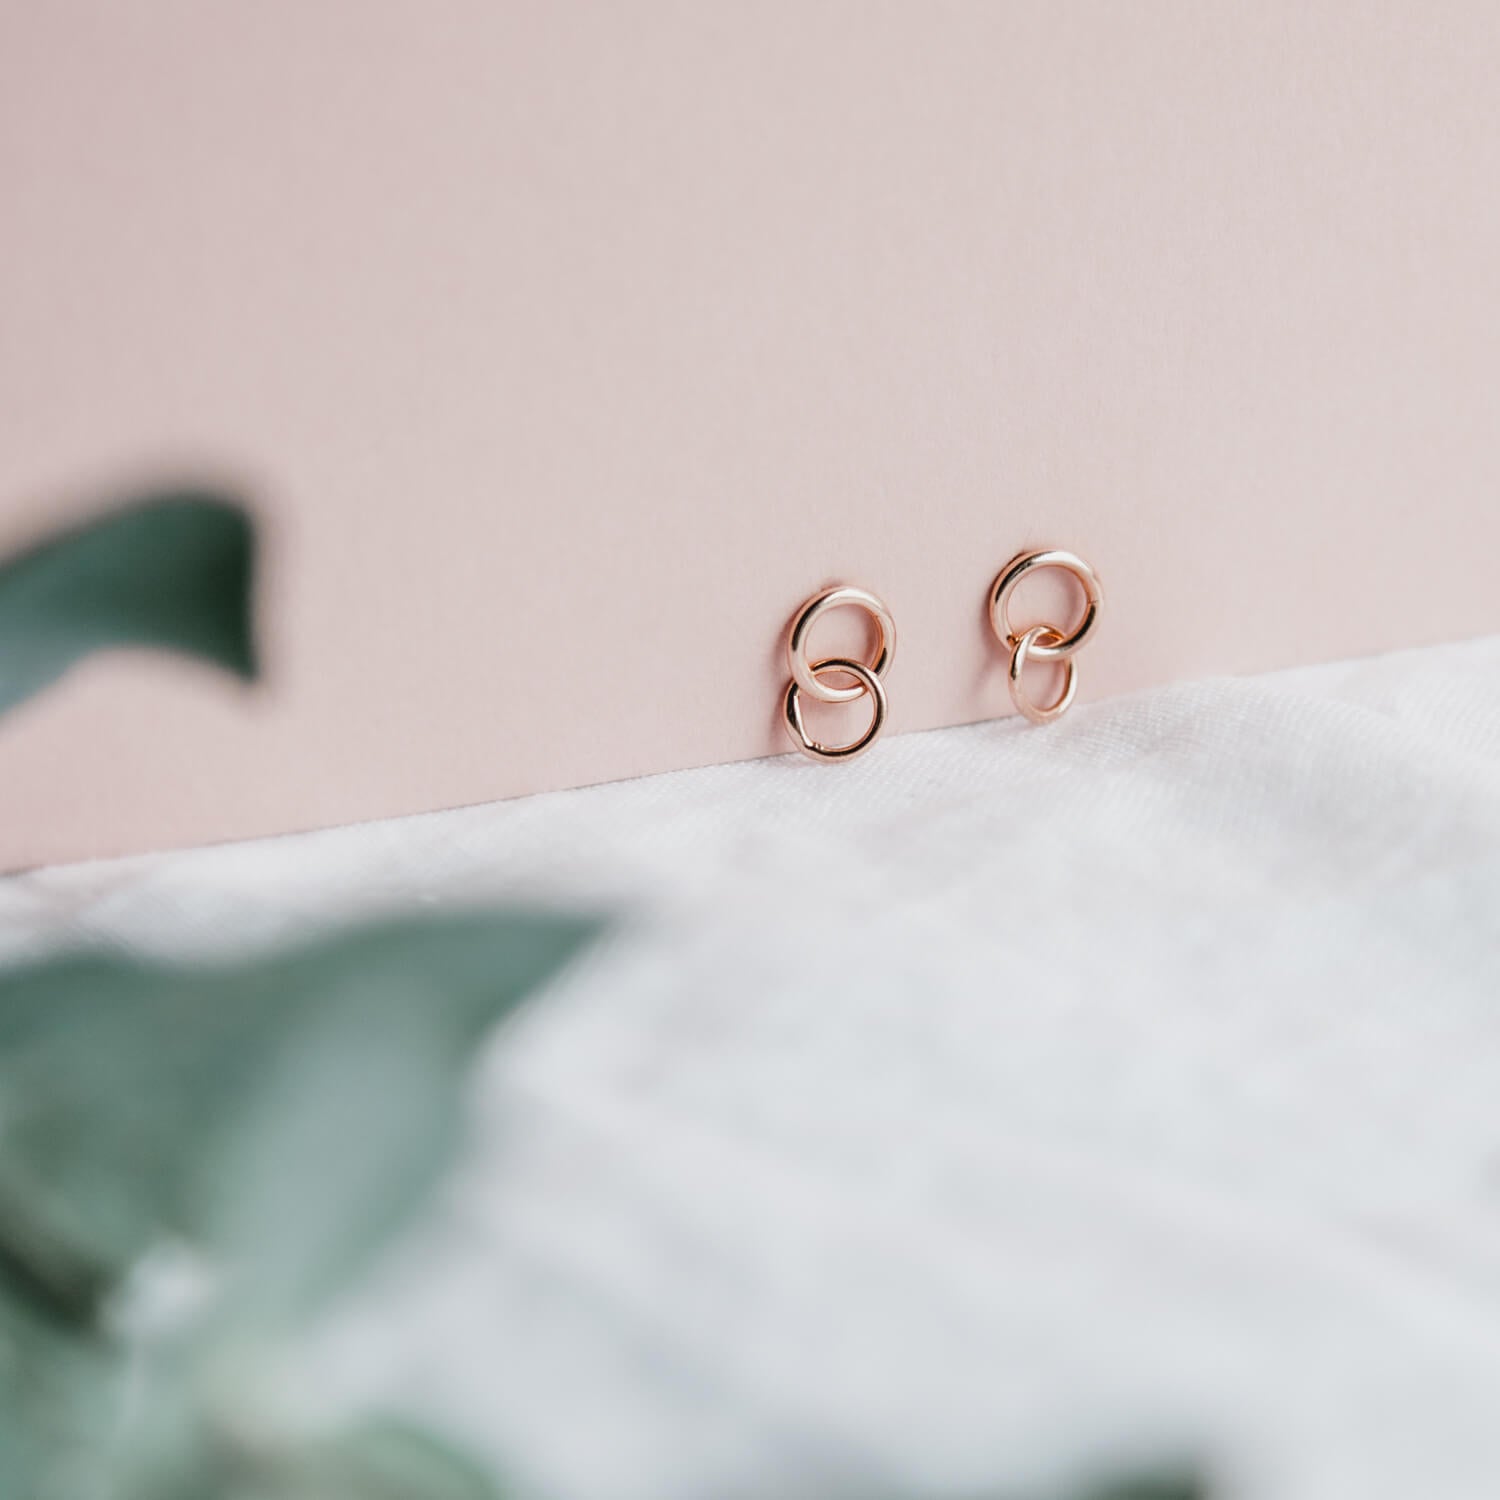 Close up of rose gold studs with interlocking ring detail